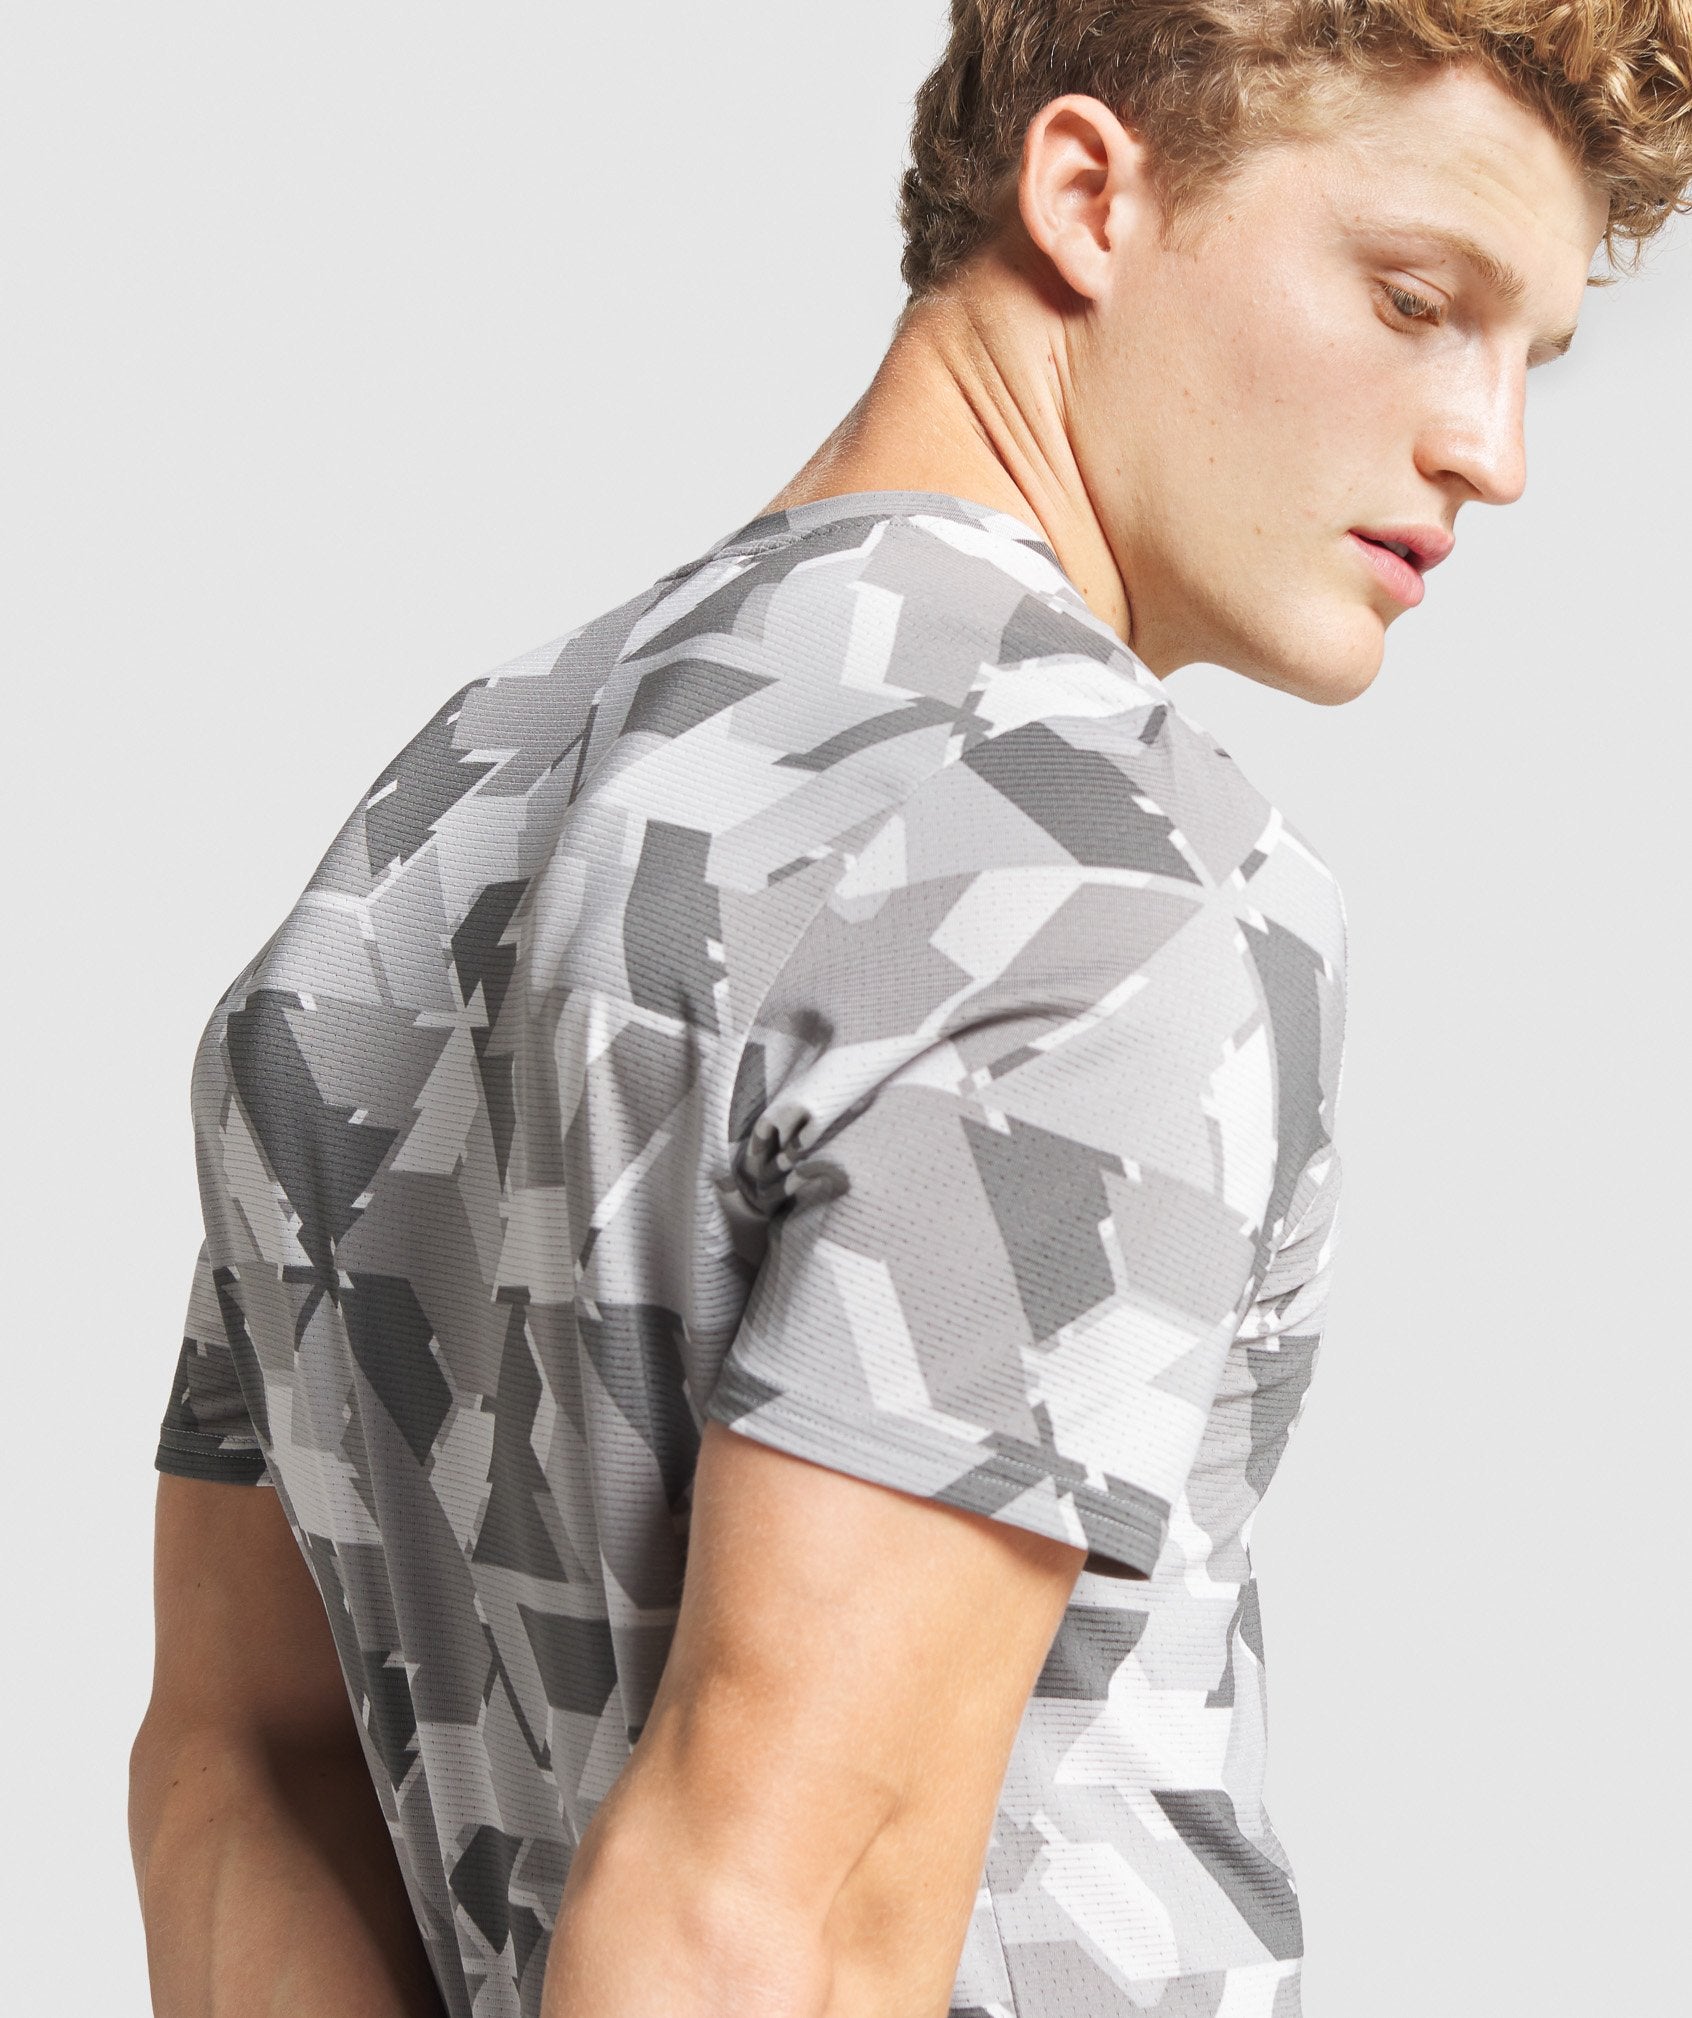 Arrival T-Shirt in Camo - view 7